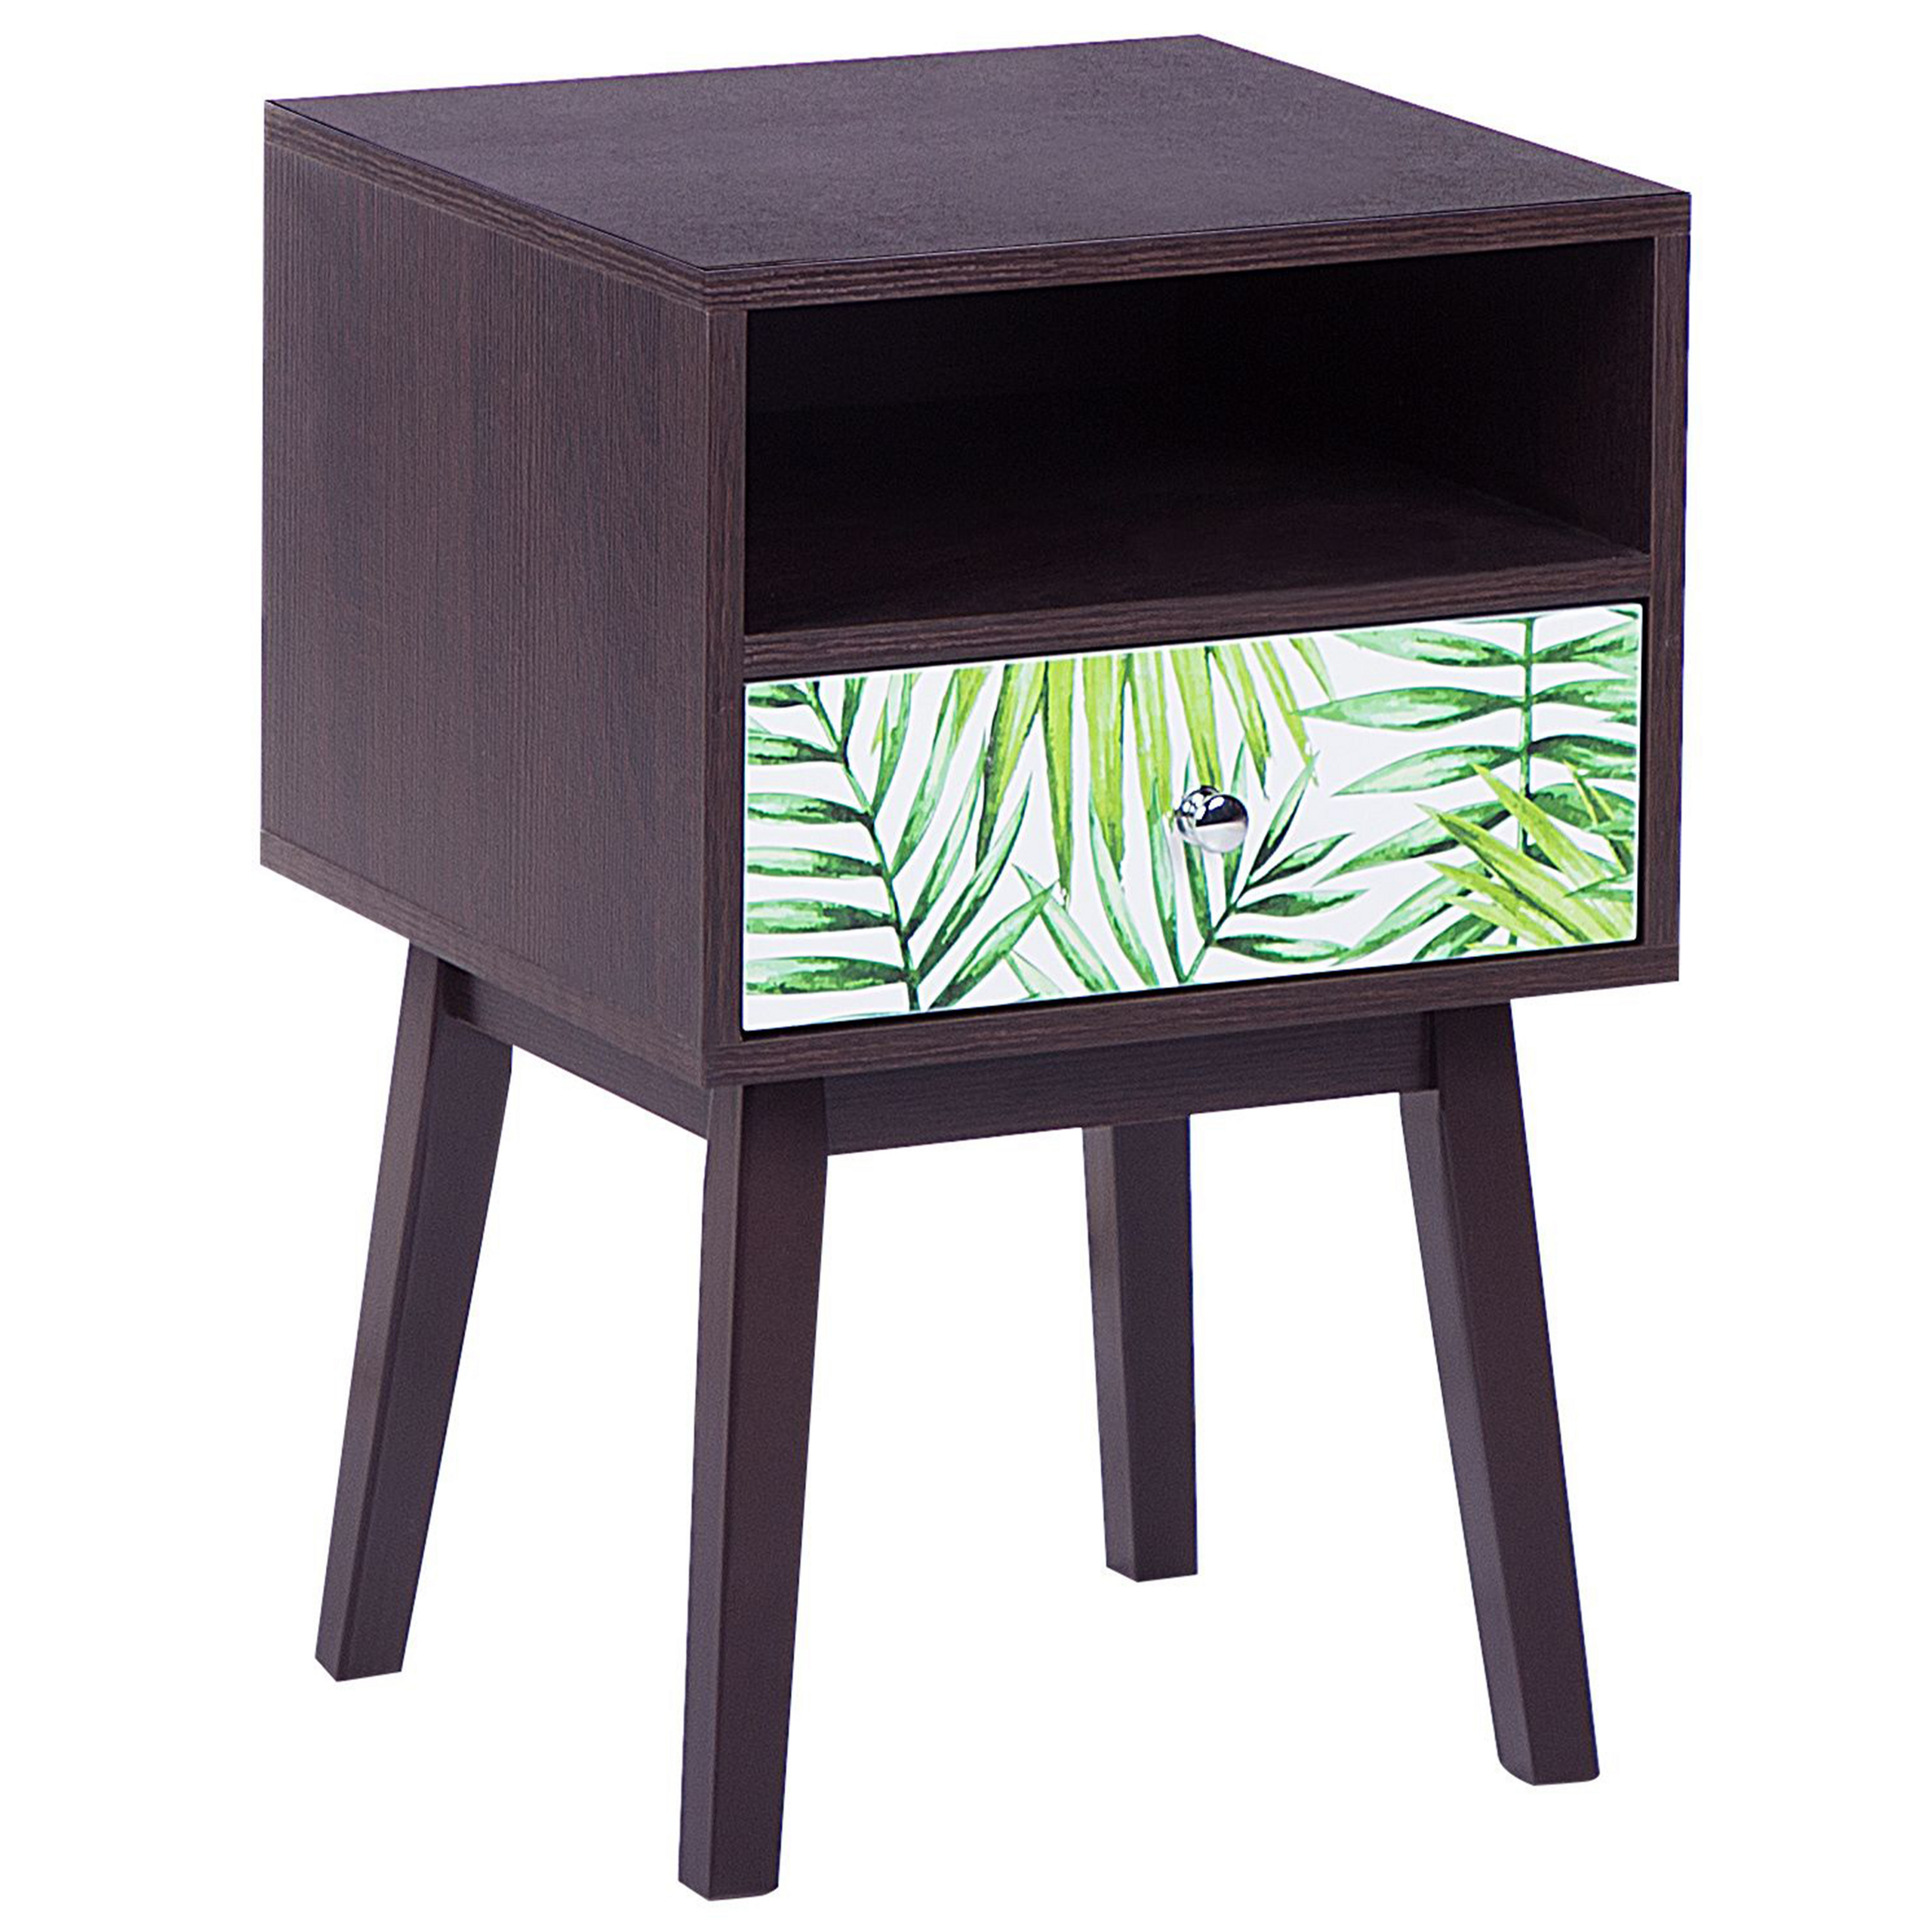 Beliani Bedside Table Nightstand Dark Wood with Floral Pattern 1 Drawer Manufactured Wood Modern Design